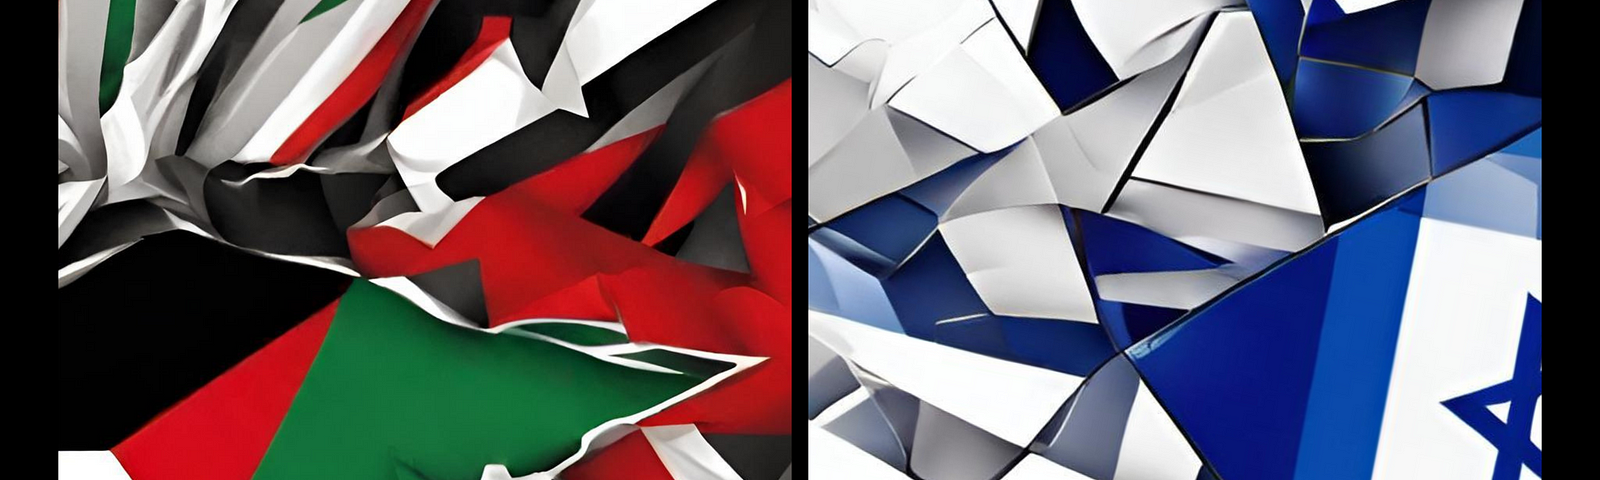 A shattered Palestinian flag on the left and a shattered Israeli flag on the right with a black line separating them from each other.